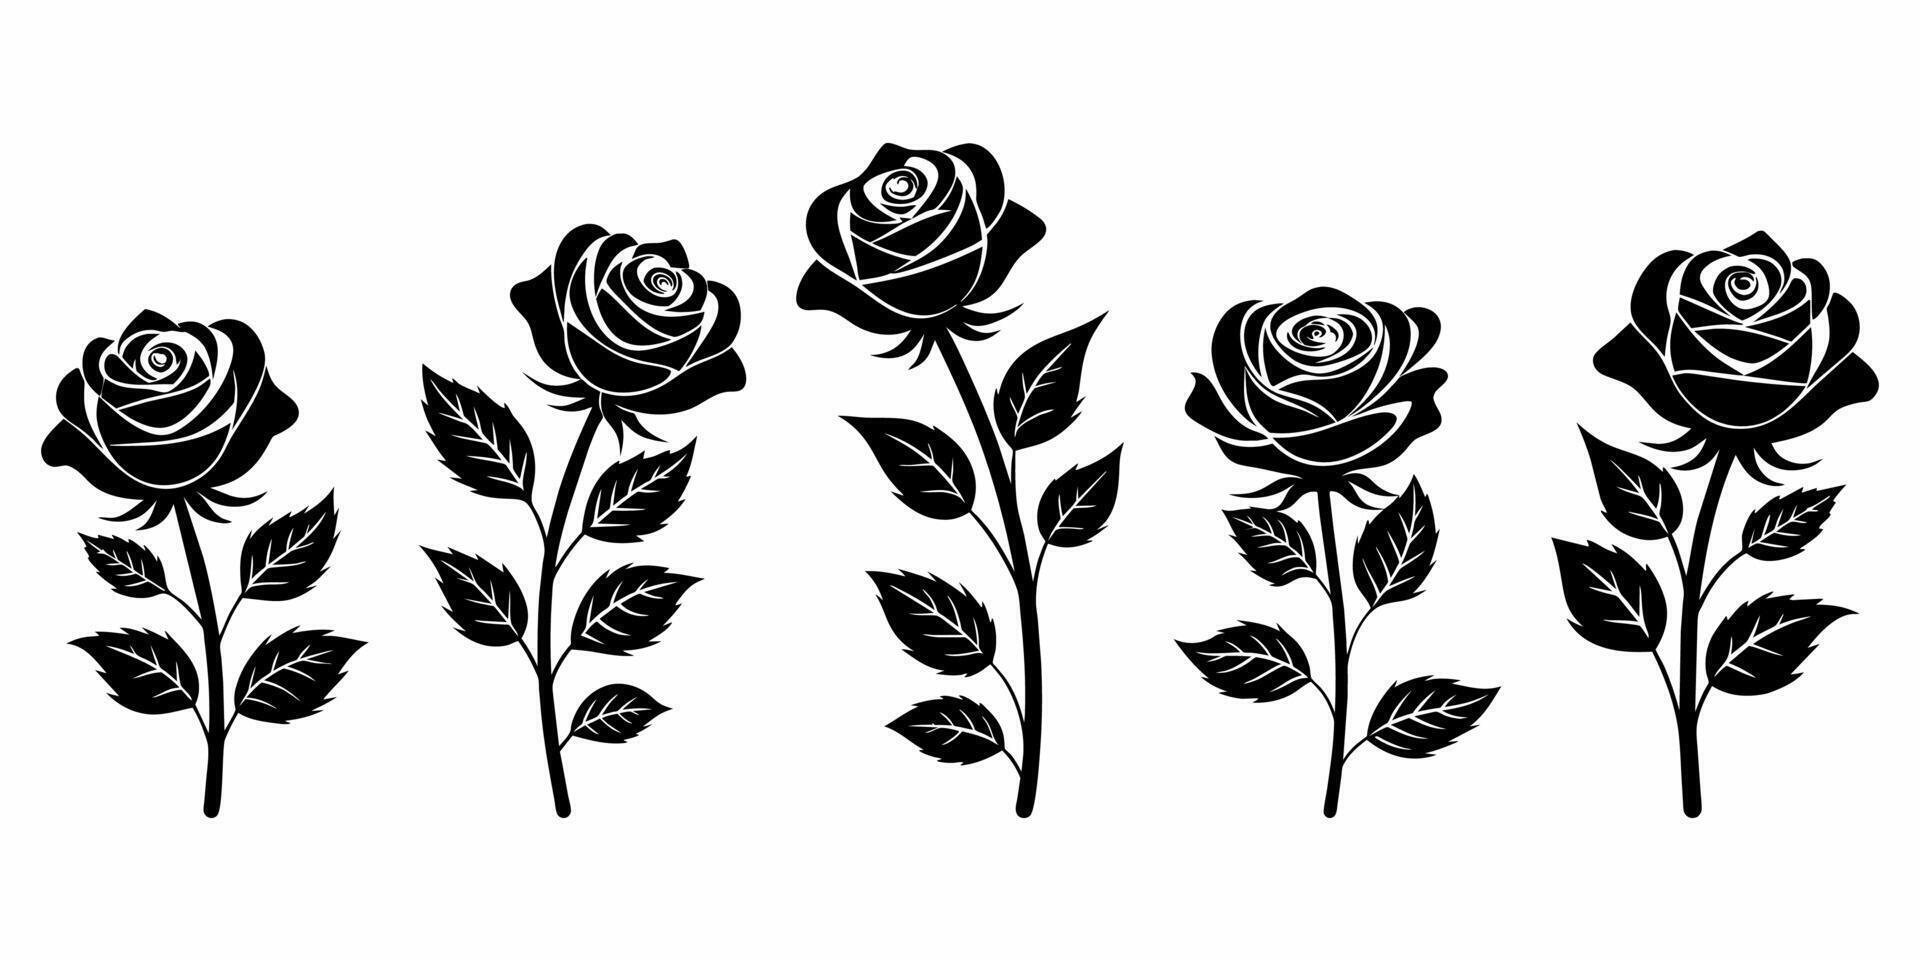 5 set of decorative roses with leaves silhouette vector